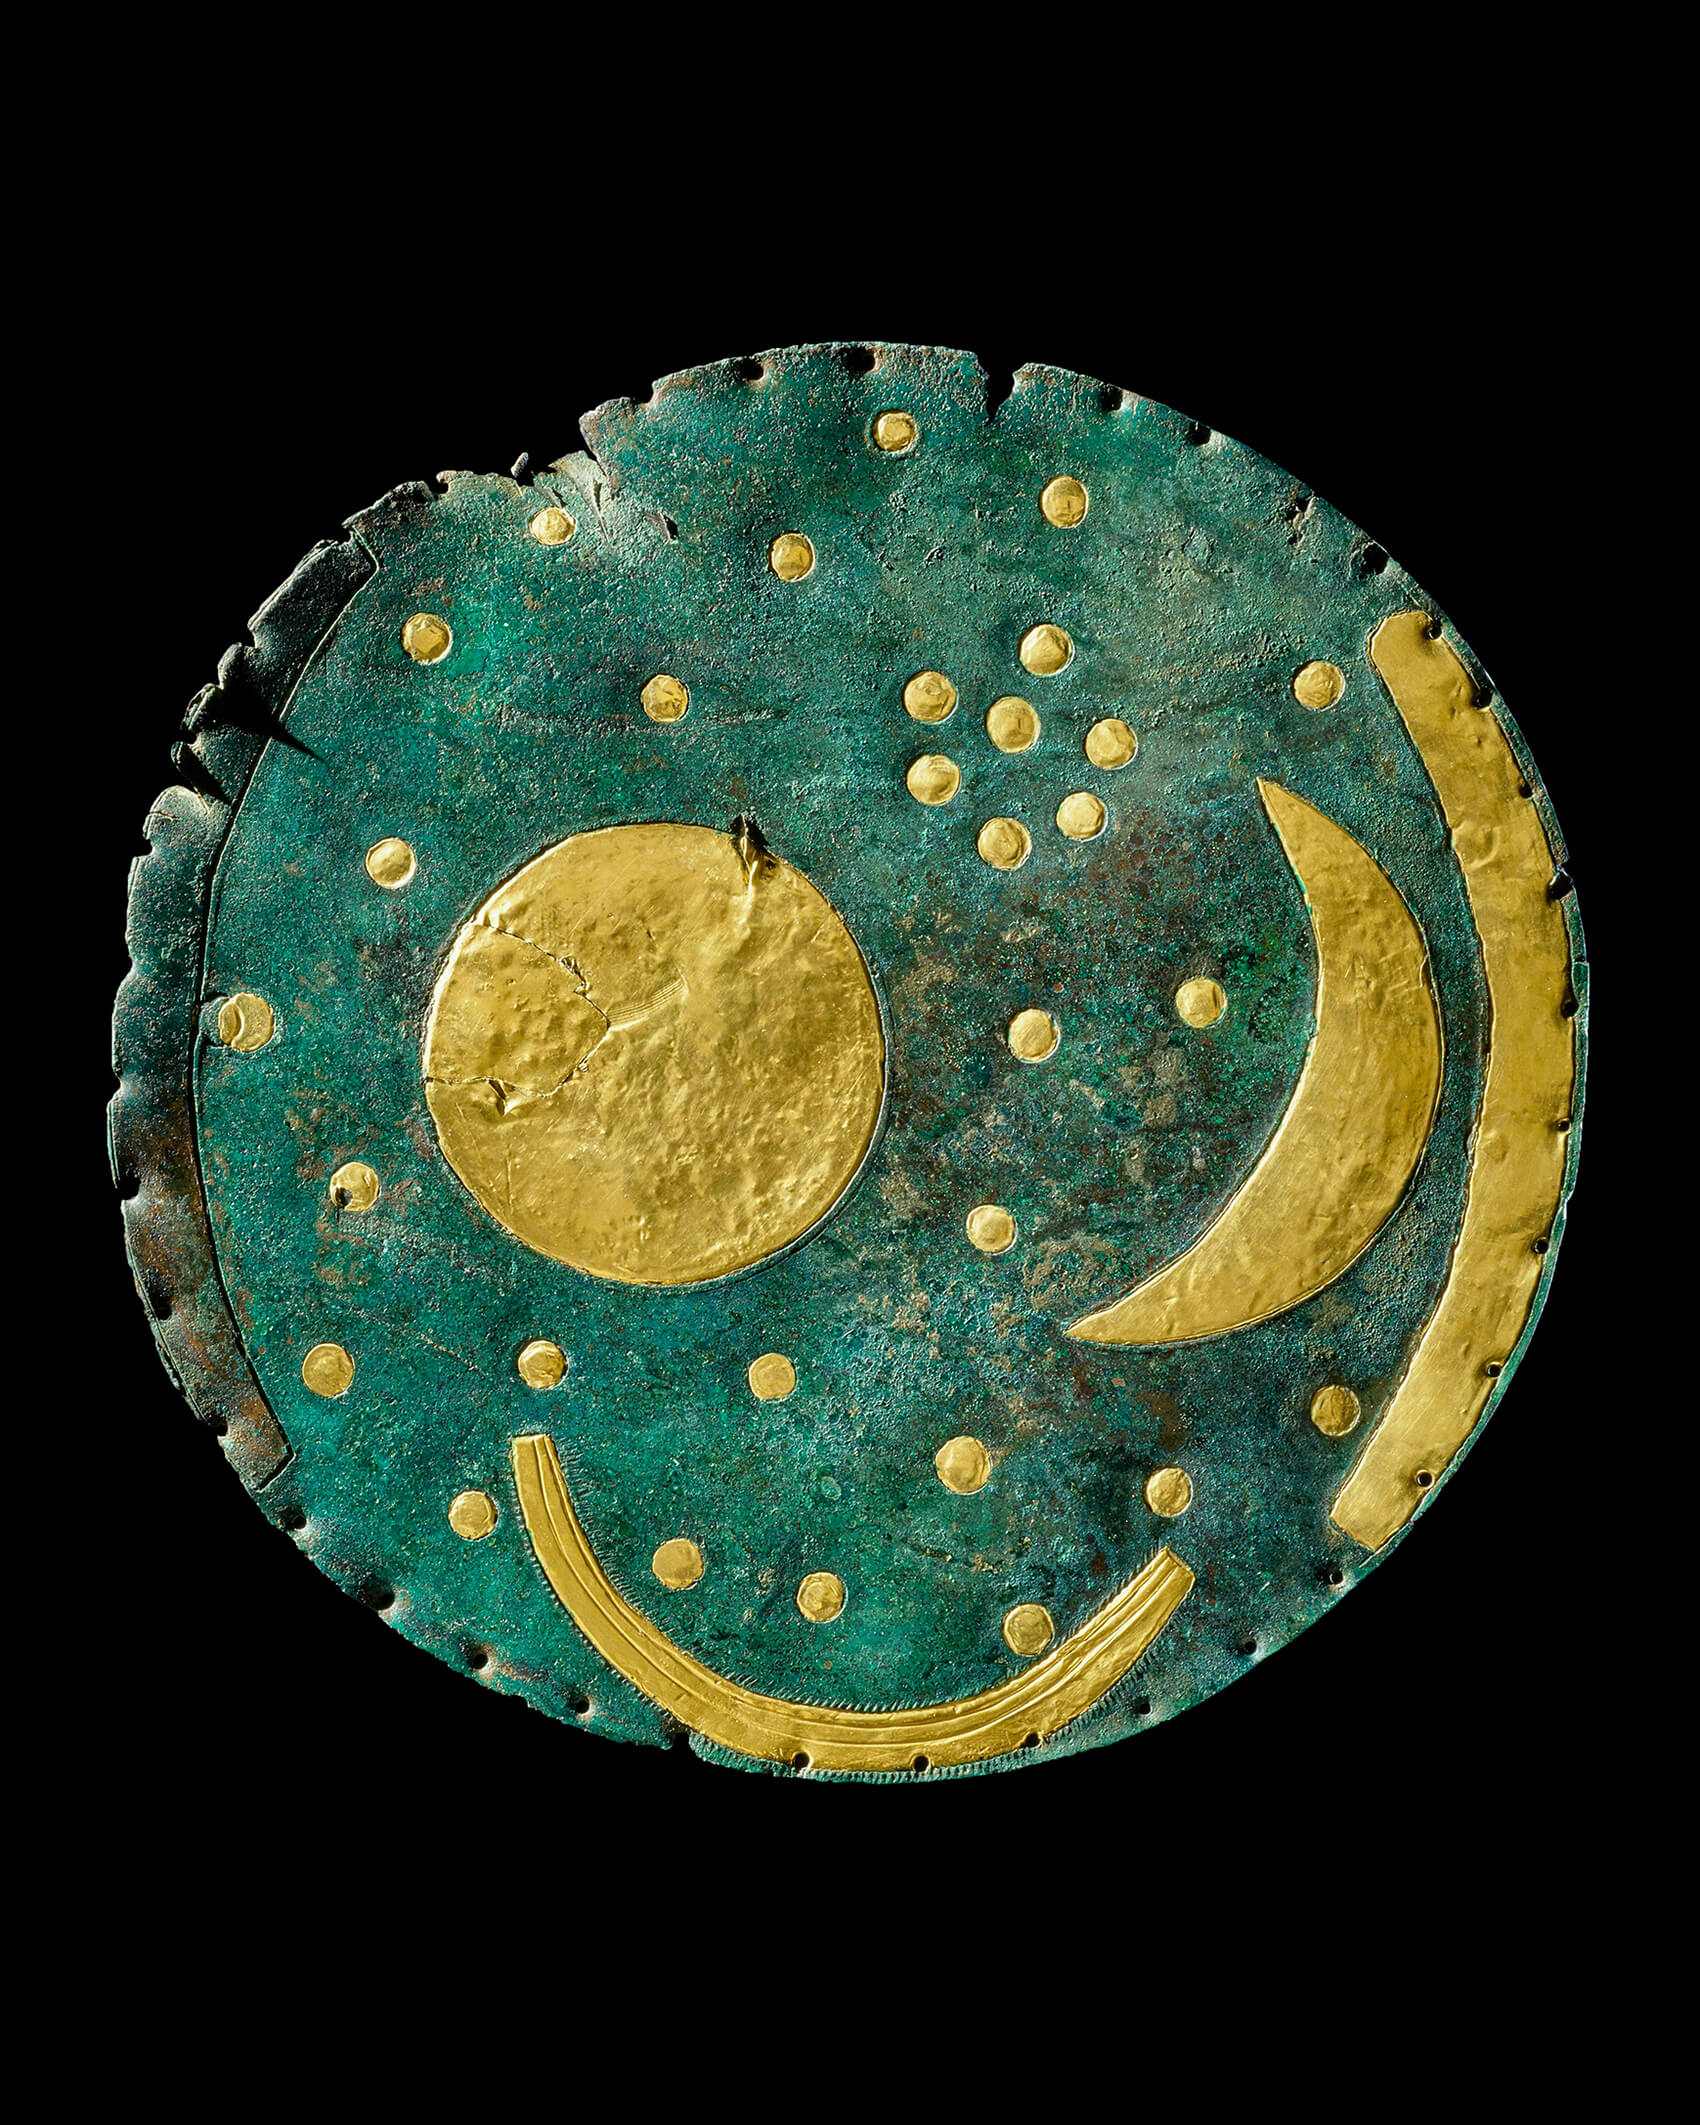 Nebra Sky Disc, Germany, about 1600 BC. Photo courtesy of the State Office for Heritage Management and Archaeology Saxony-Anhalt, Juraj Lipták